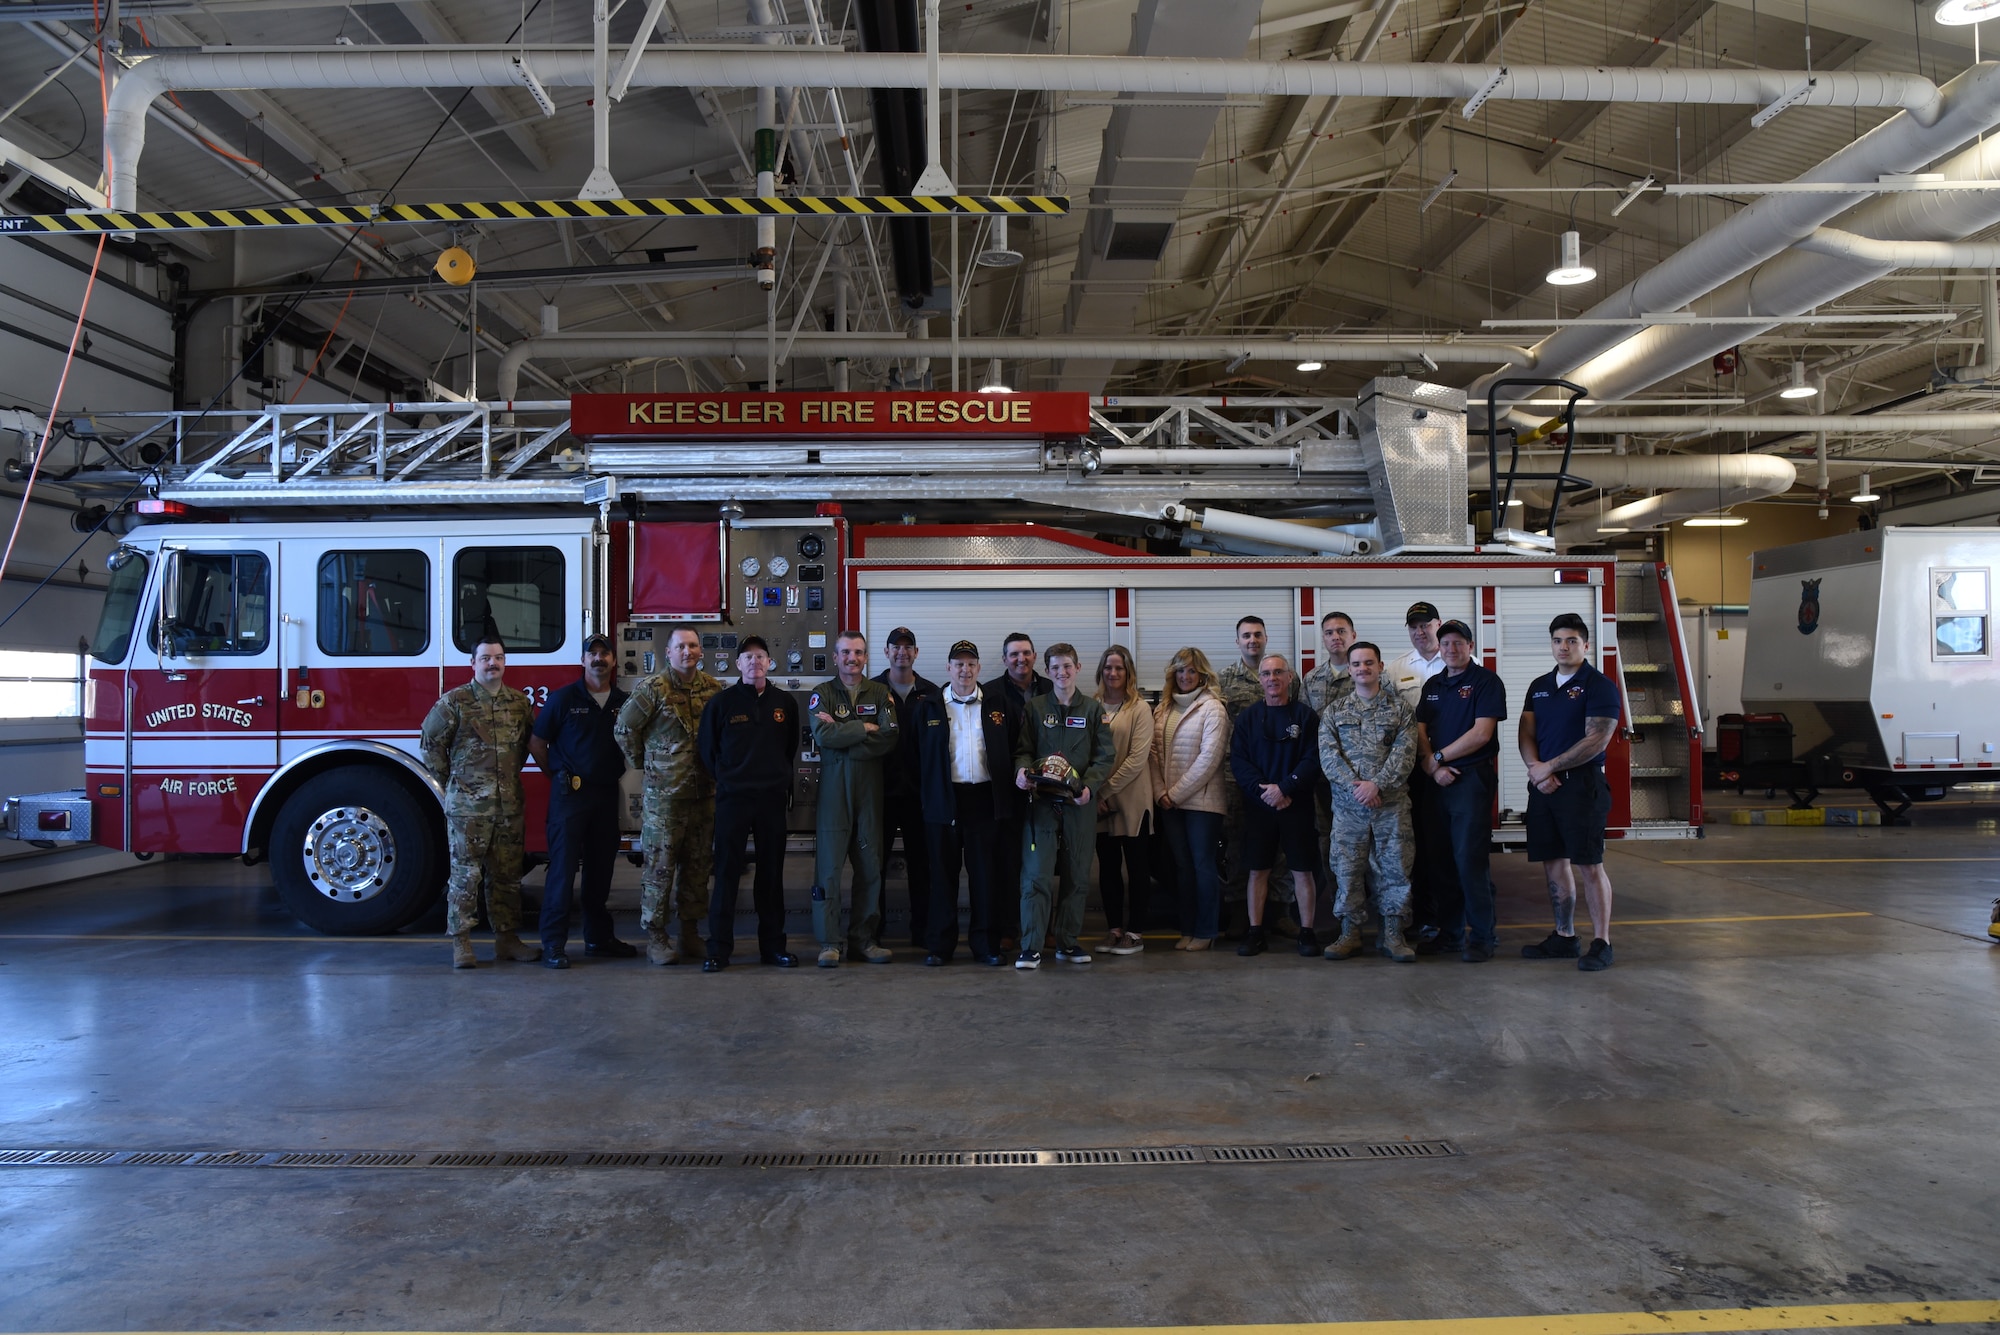 Honorary 2nd Lt. Charles “Payton” Burge (center) poses for a photo with family and Airmen of the base fire department, during the Pilot for a Day program Dec. 19, Keesler Air Force Base, Miss. The 403rd Wing collaborated with Make A Wish Mississippi who selects the children who will participate in the Program. (U.S. Air Force photo by Lt. Col. Marnee A.C. Losurdo)